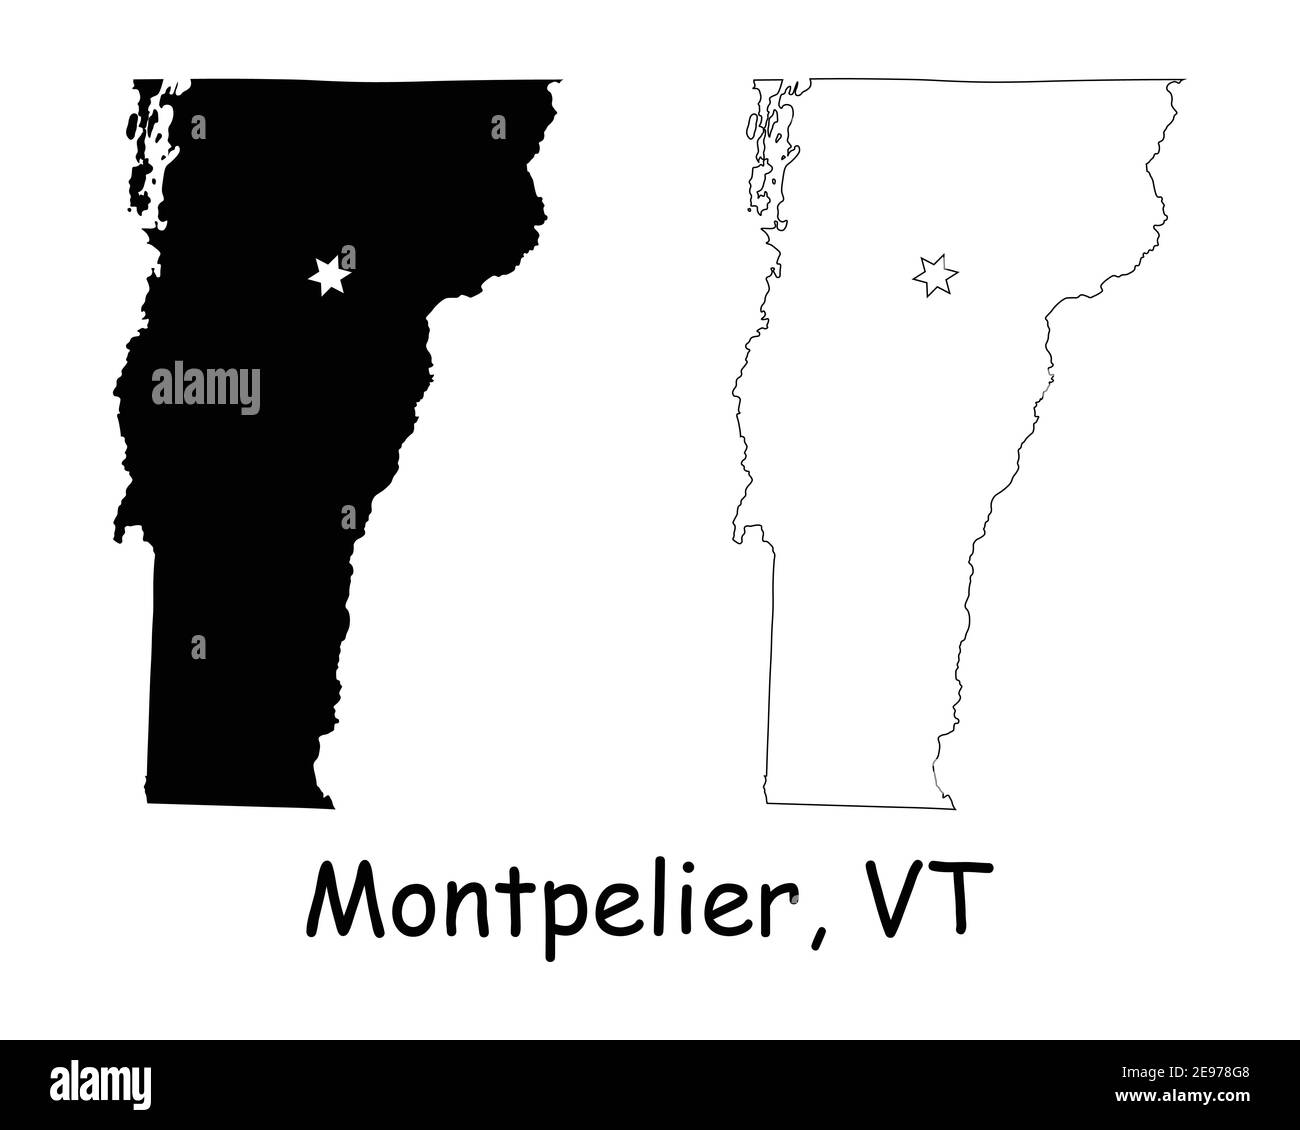 Vermont VT state Map USA with Capital City Star at Montpelier. Black silhouette and outline isolated maps on a white background. EPS Vector Stock Vector